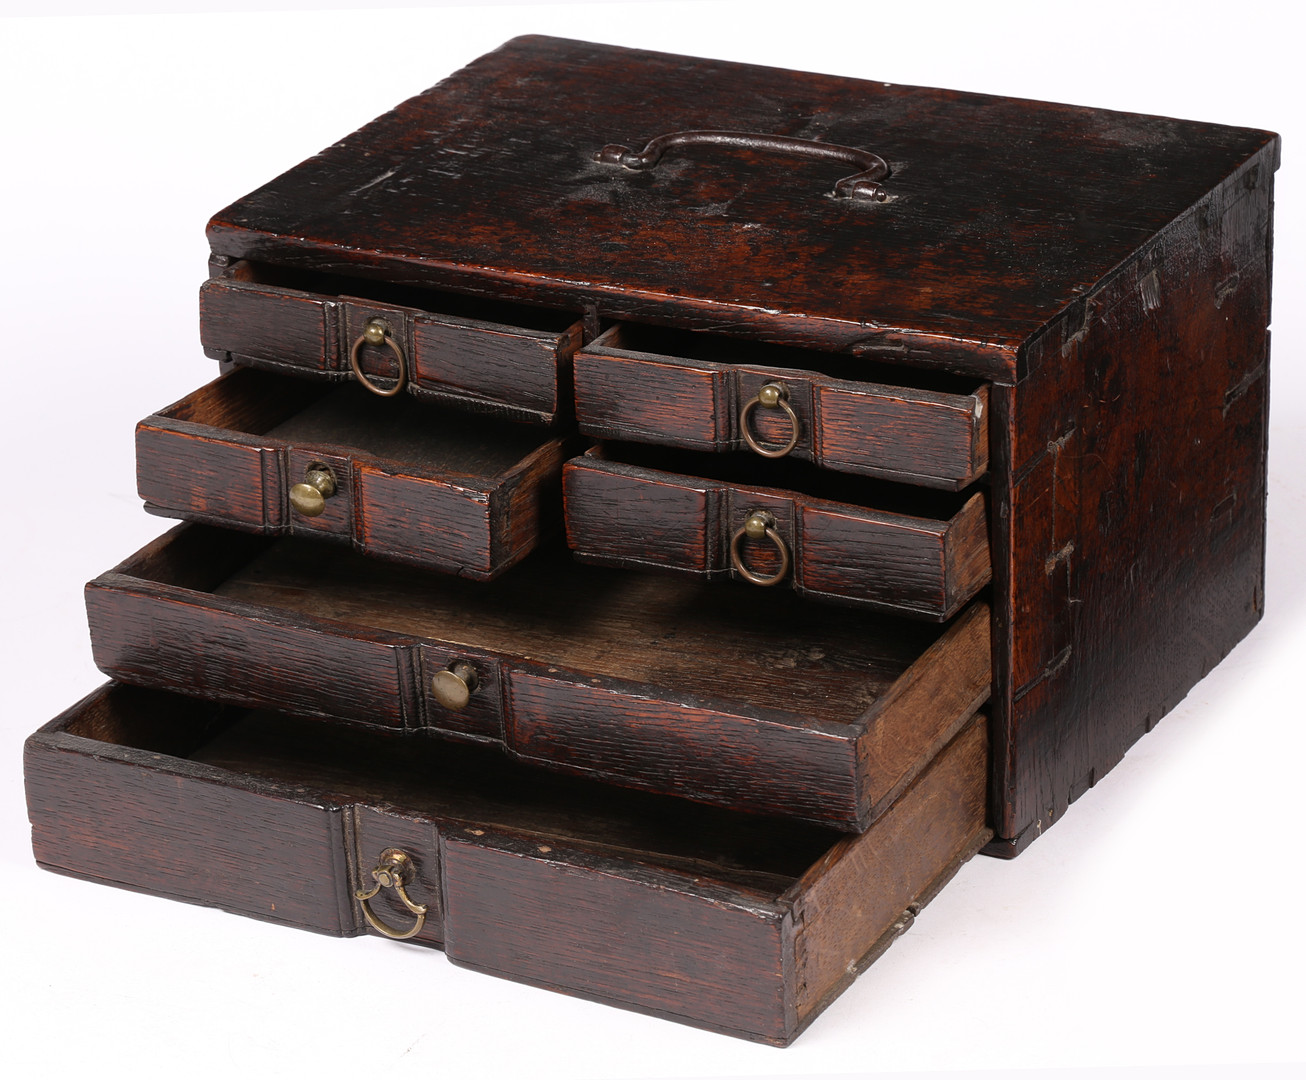 AN UNUSUAL SMALL BOARDED OAK TABLE-TOP CHEST OF DRAWERS, ENGLISH, CIRCA 1700-20. - Image 5 of 5